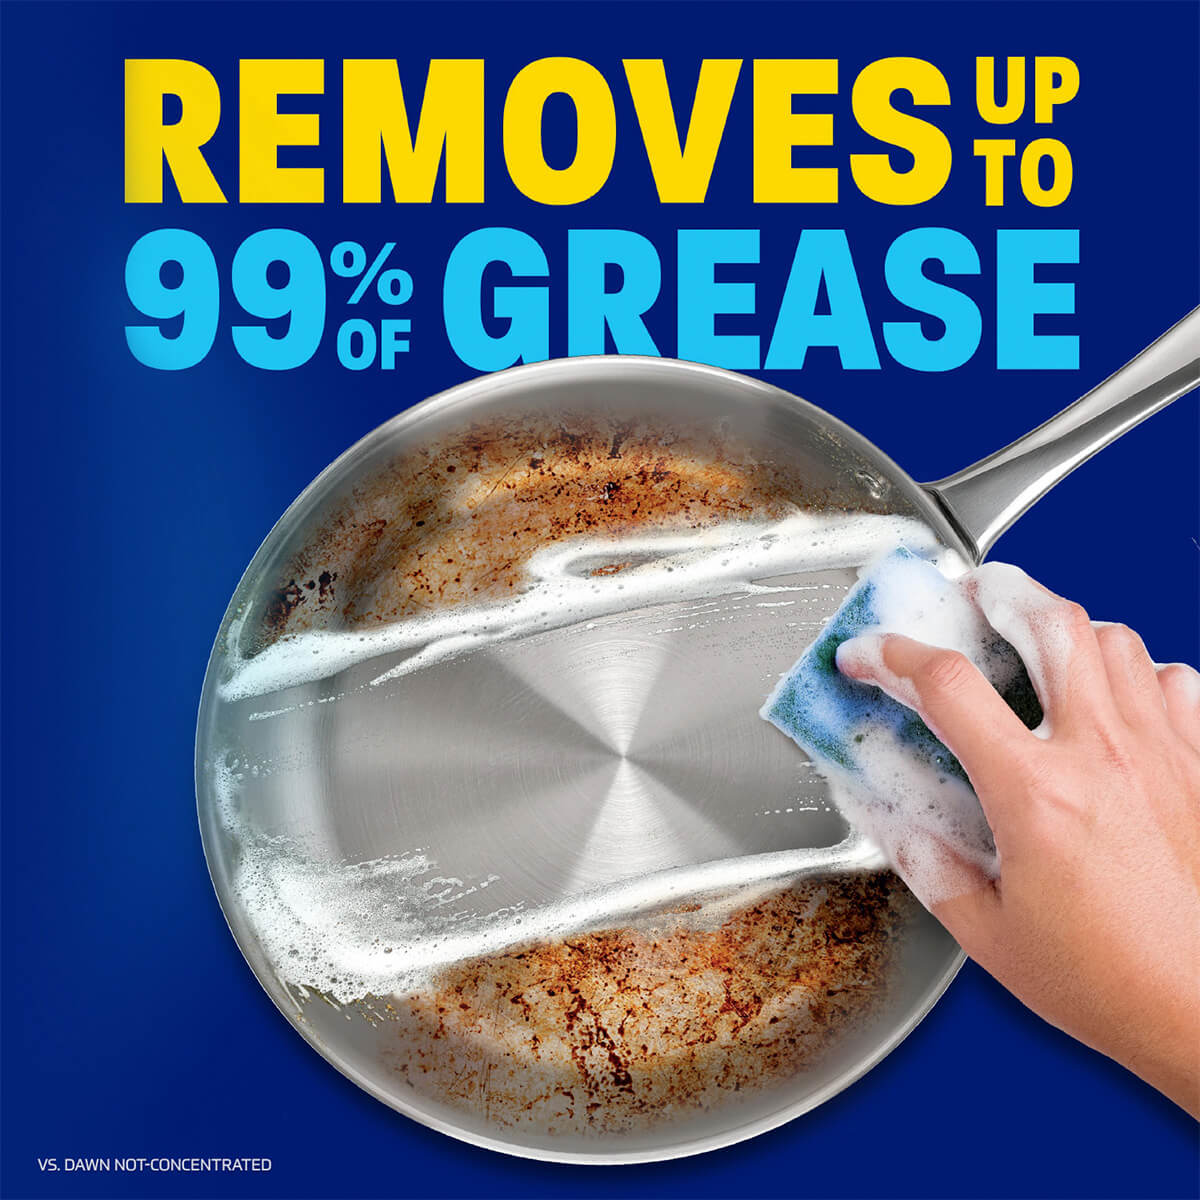 Removes up to 99% of grease